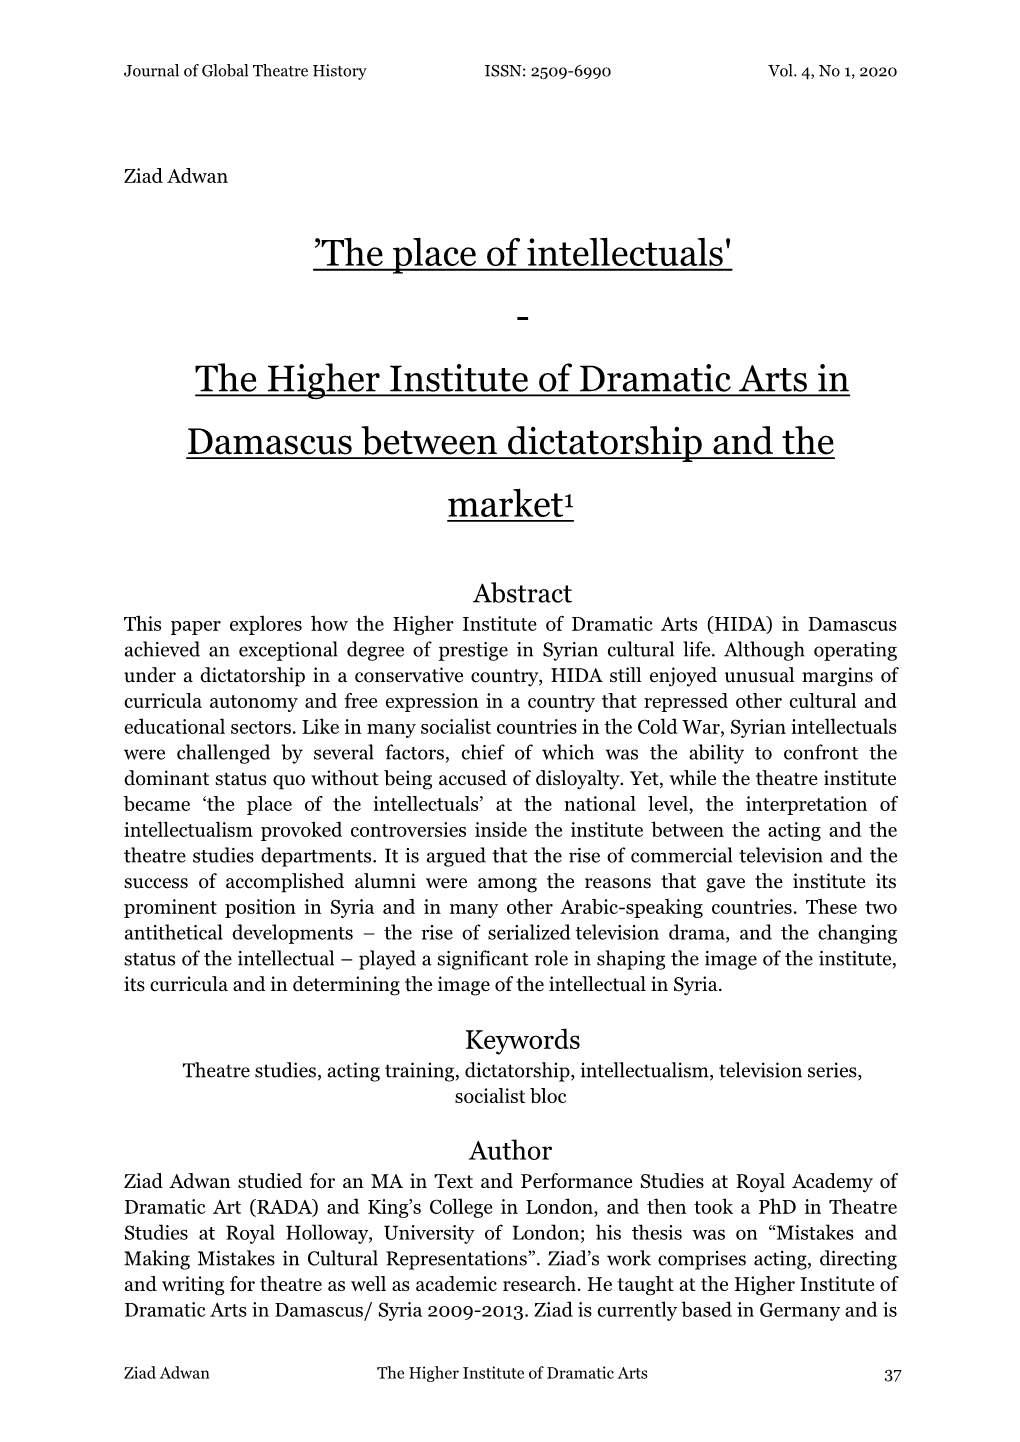 The Higher Institute of Dramatic Arts in Damascus Between Dictatorship and The